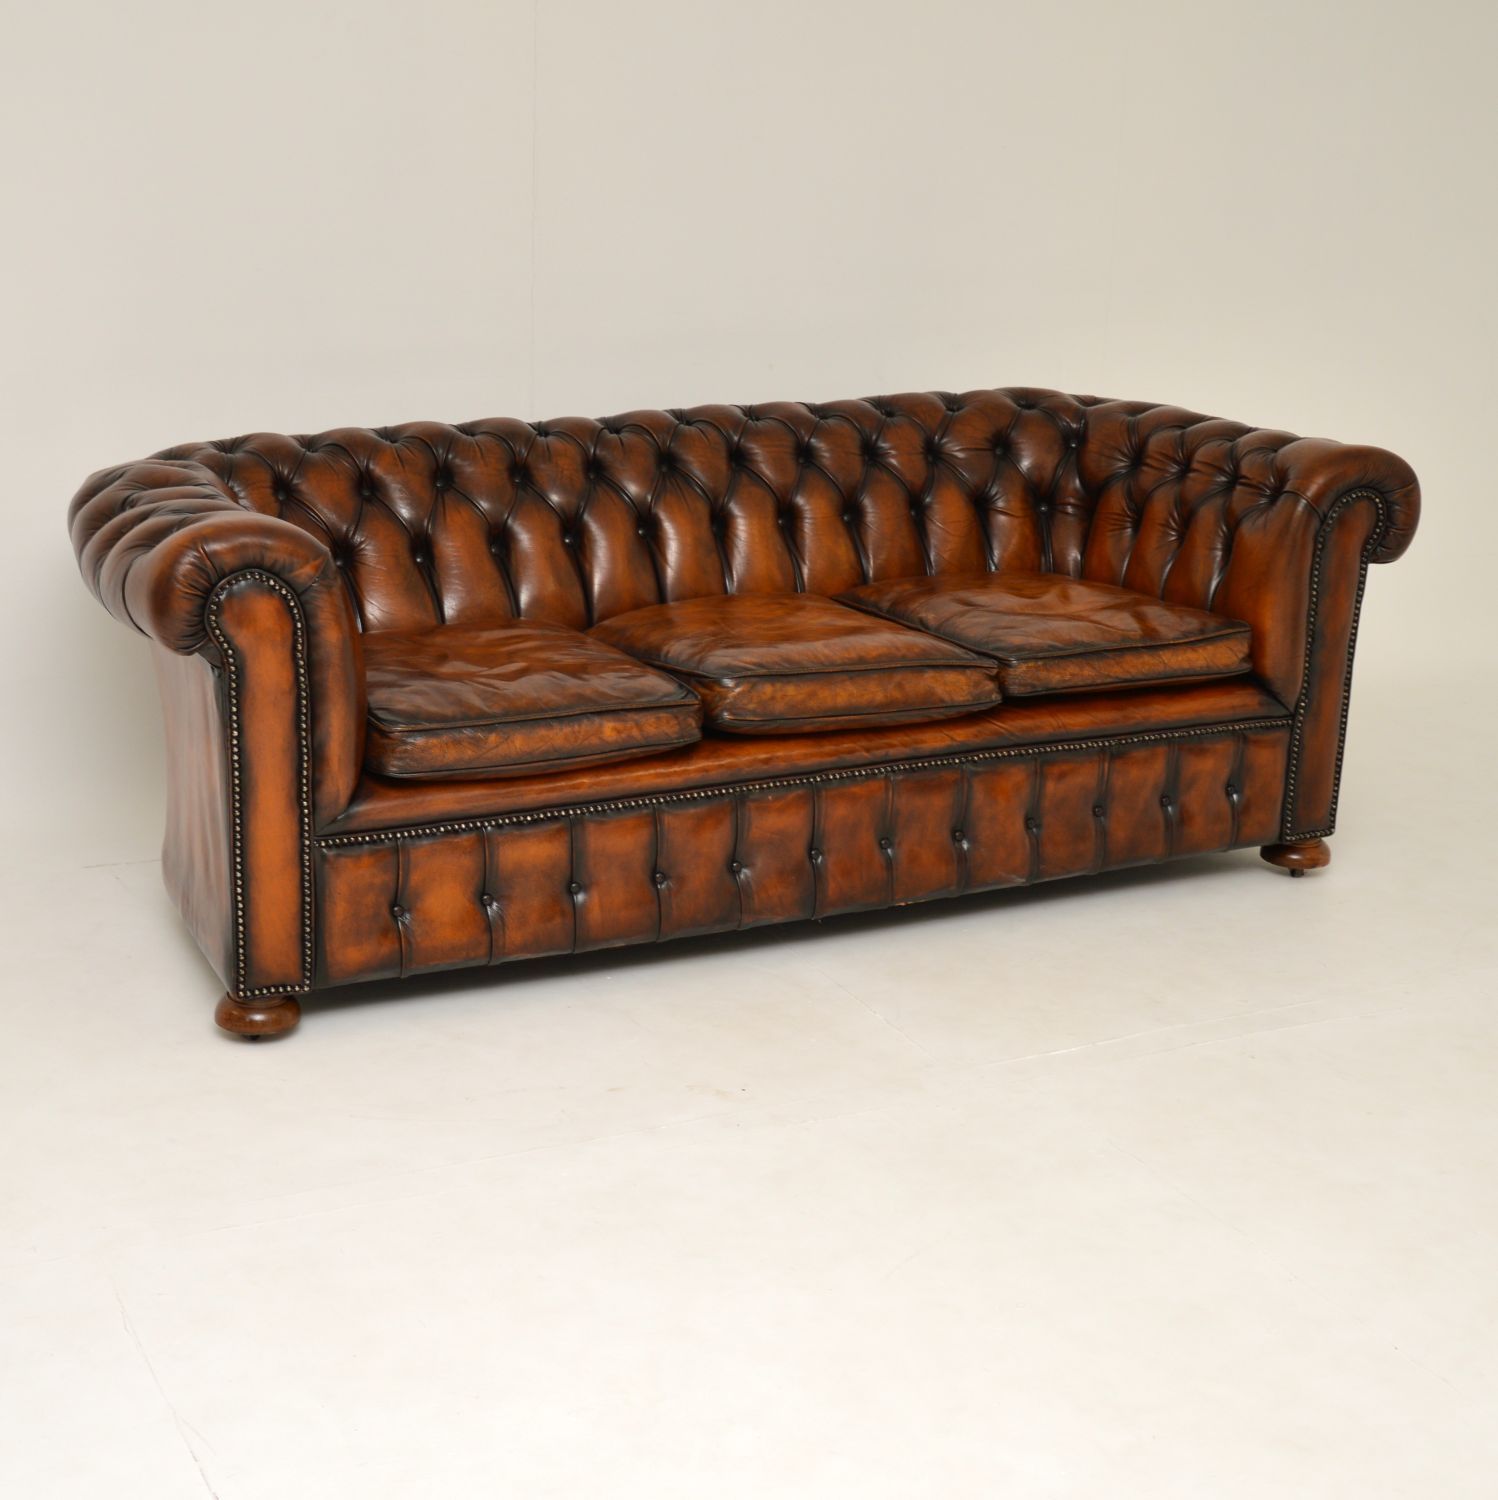 Antique Victorian Style Deep Buttoned Leather Chesterfield Regarding Victorian Leather Sofas (View 2 of 15)